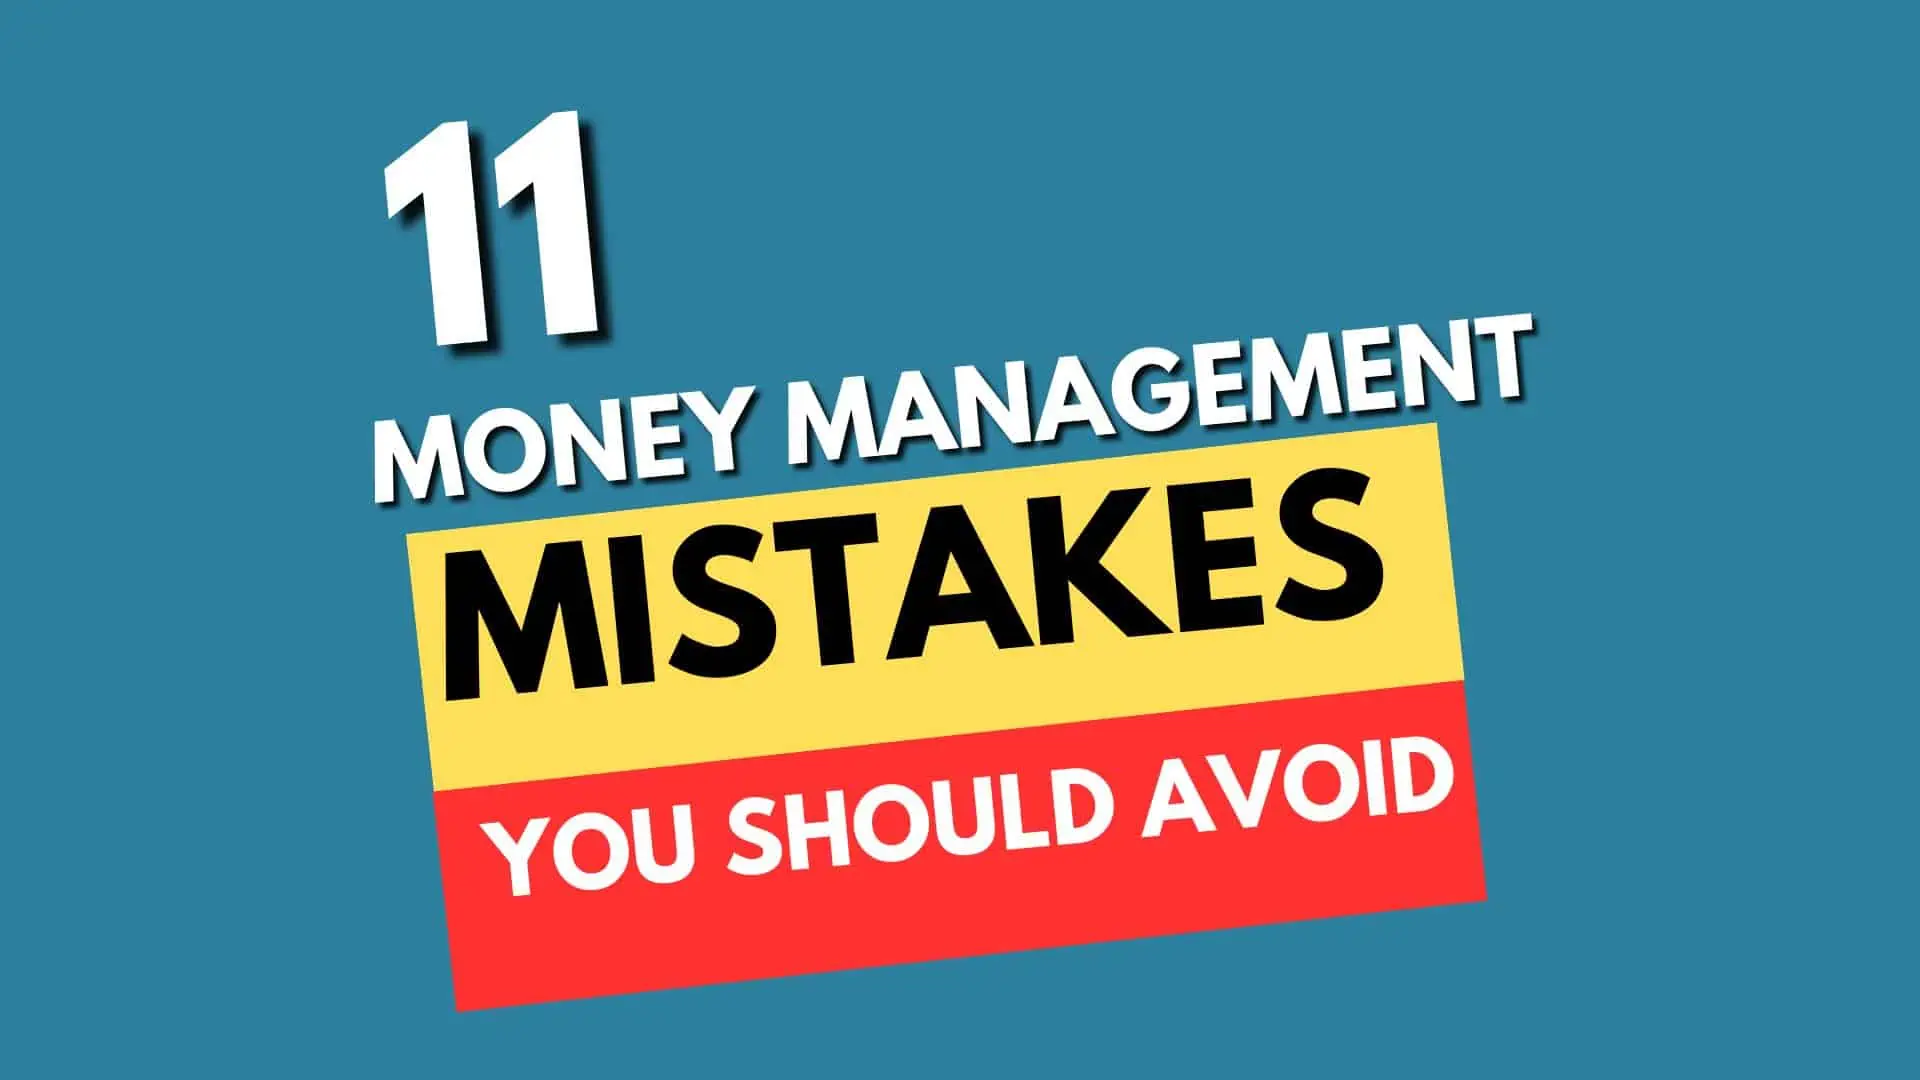 11 Money management mistakes that you should avoid